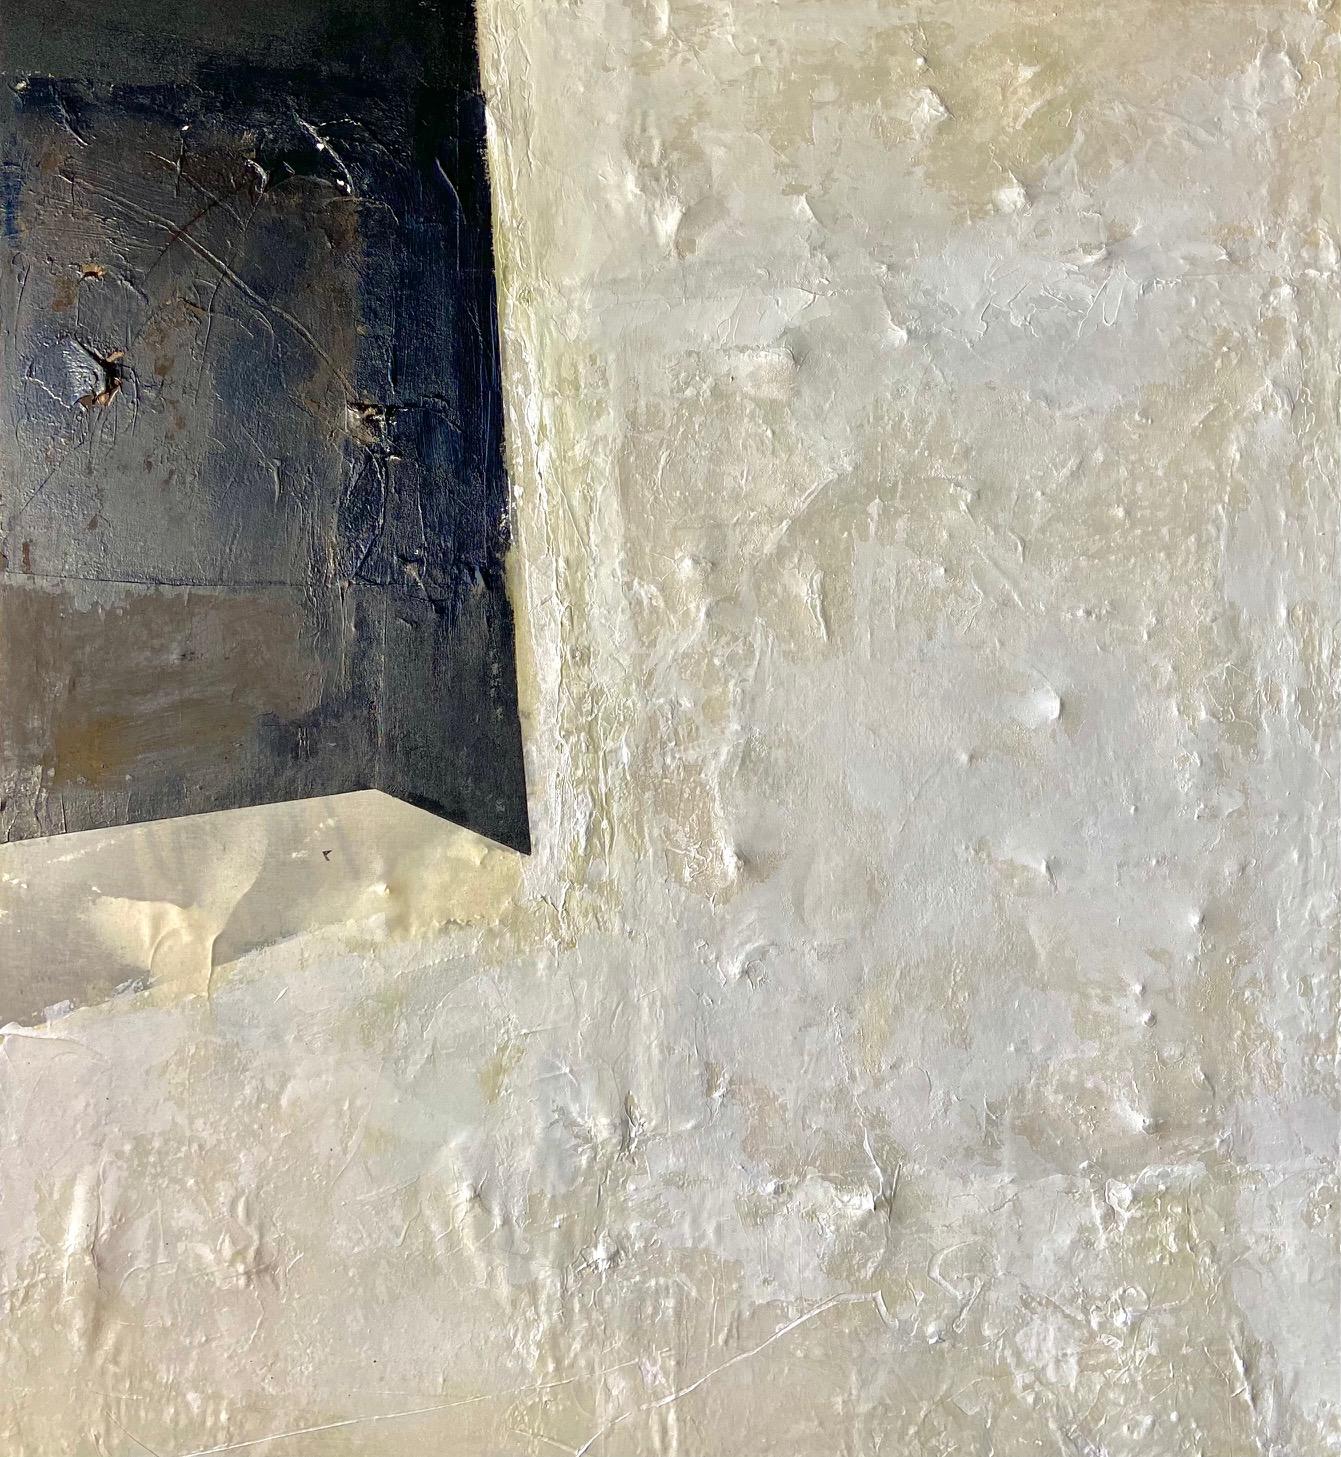 Black Window 2022
Jerzy Kubina Polish/American Artist: Jerzy was born in Zamosc, Poland, 1956. Studied at the Academy Of Fine Arts in Krakow 1981/1986 in the painting department under individual instructions of prof. Jan Szancenbach.  He decided to